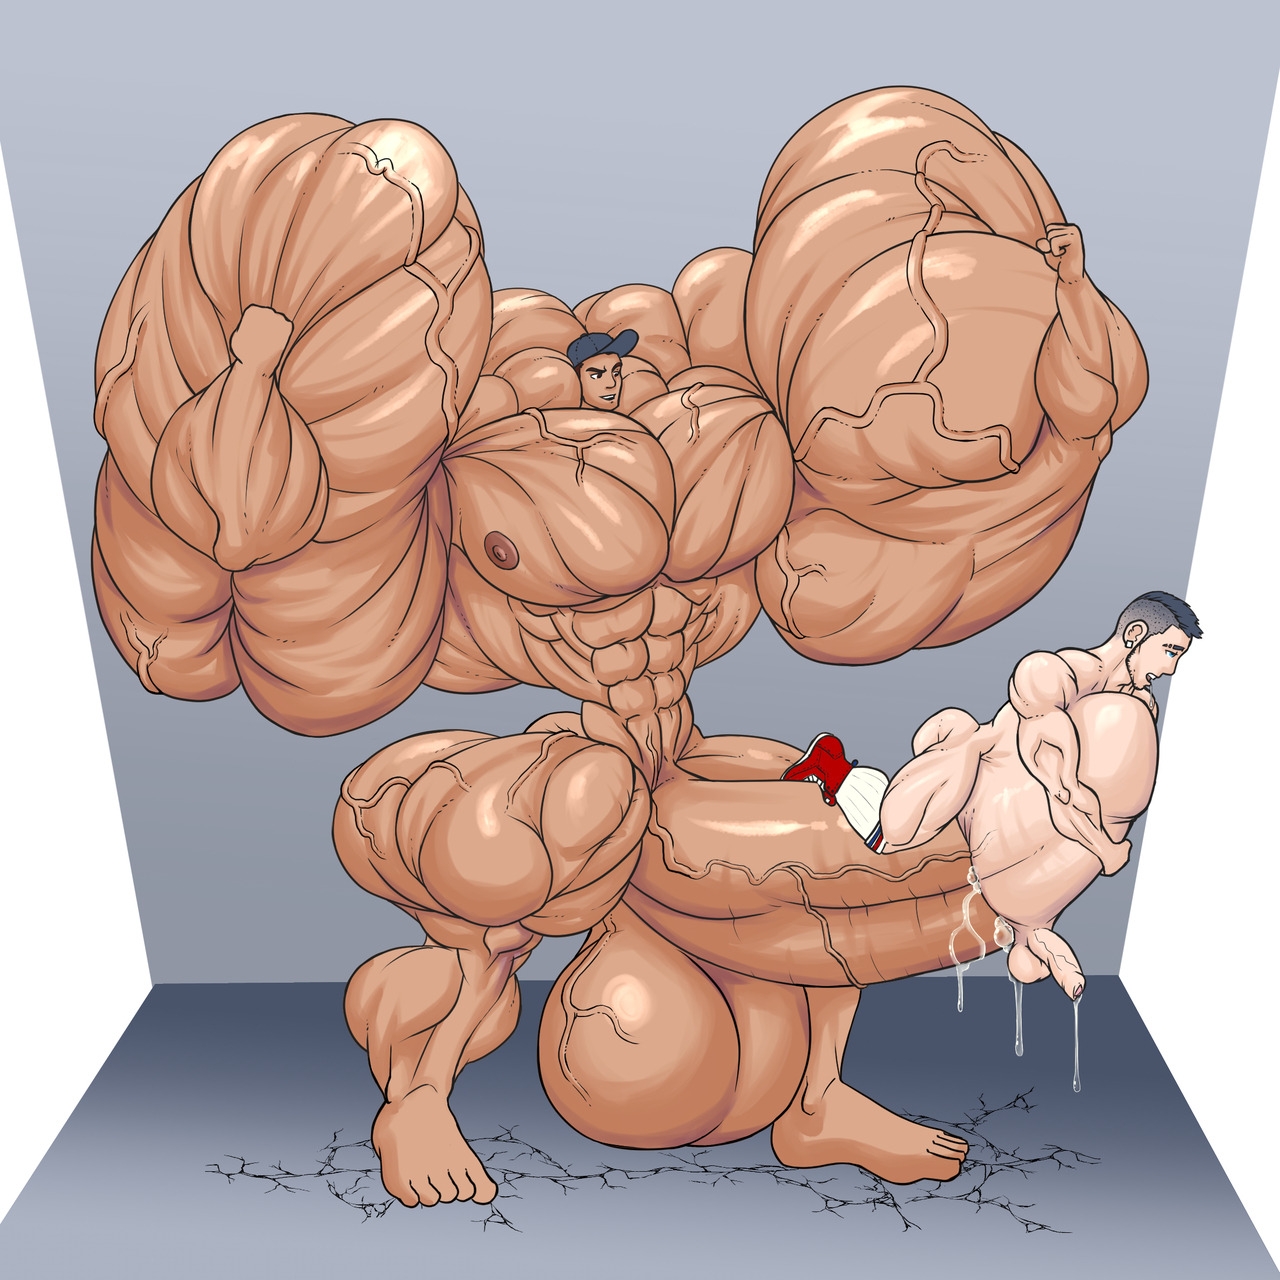 Cock Muscle Growth Animation, Furry Dick Growth